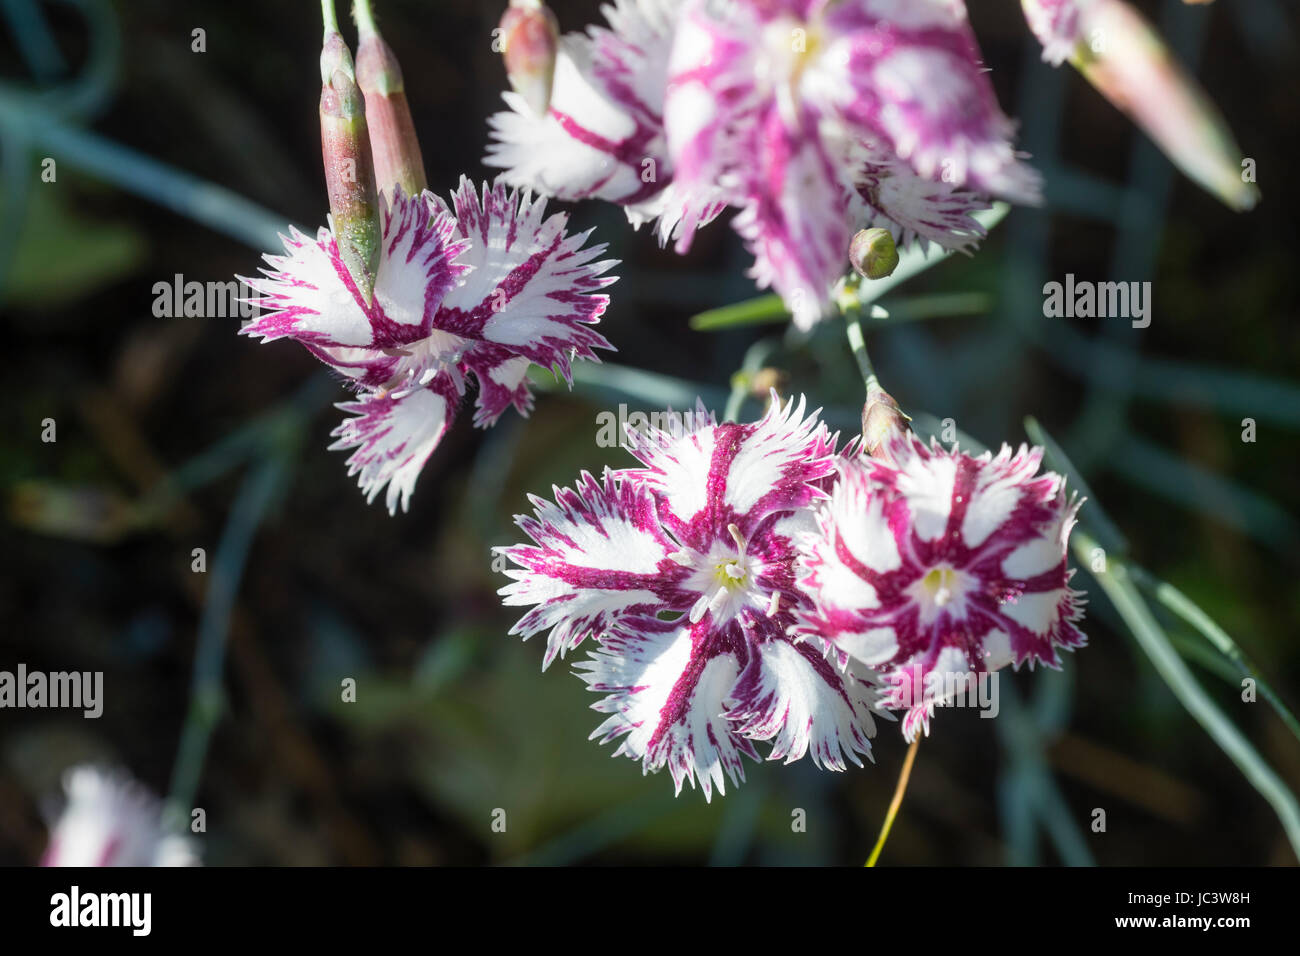 Pink streaked white fragrant flowers of the garden pink, Dianthus 'Tatra Fragrance' Stock Photo